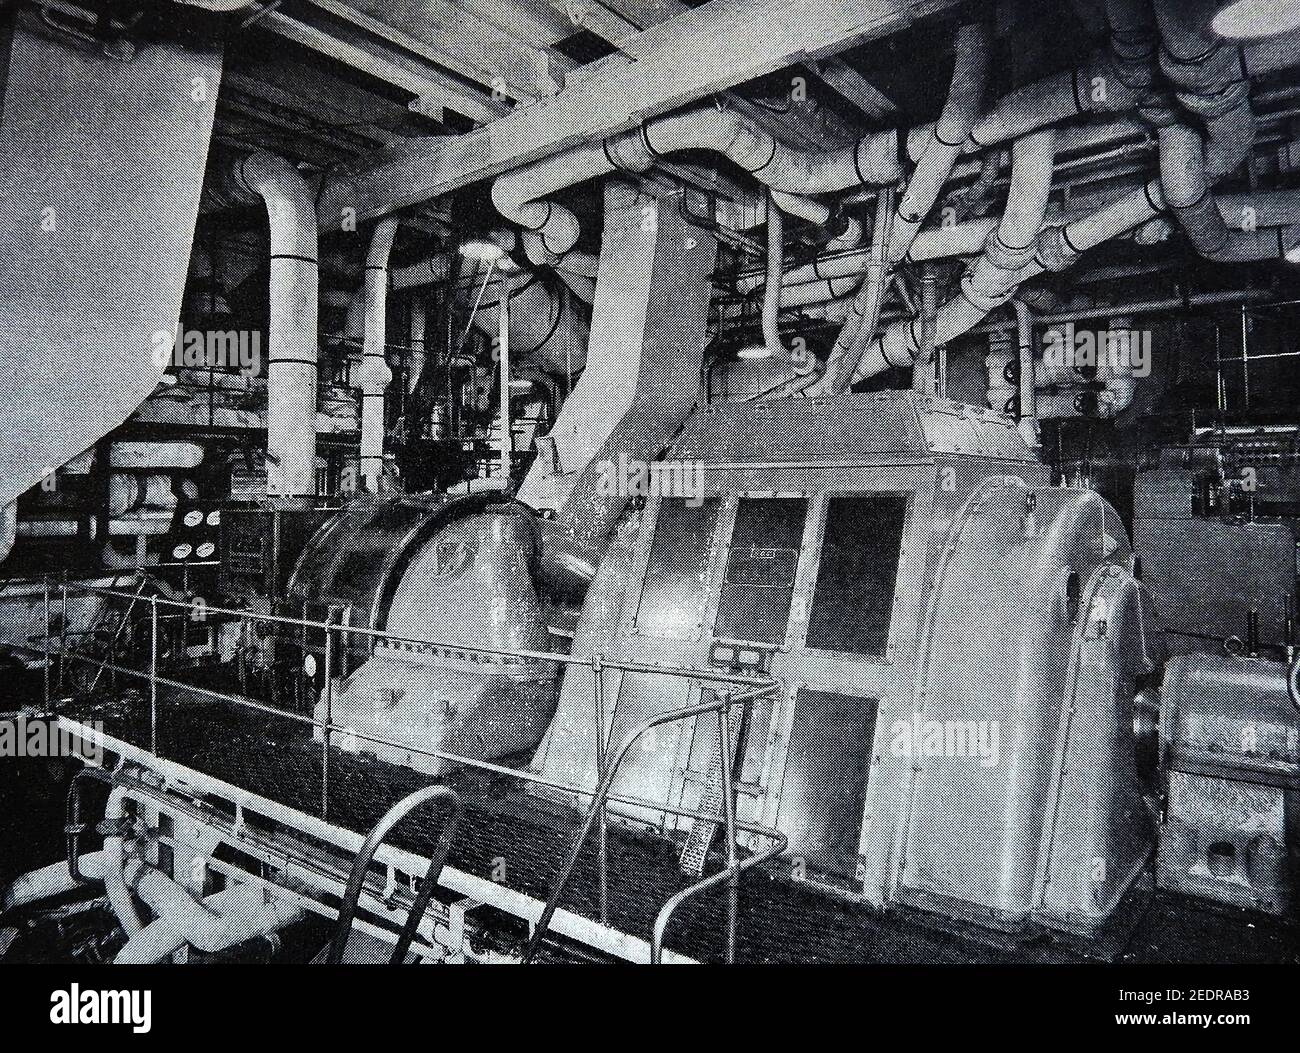 An early printed photograph of the engine room aboard the Turbo-Electric tanker TES (Turbo Electric Ship) SAN SILVESTRE  (aka Silvestre) built  by Swan Hunter at Haverton Hill  shipyard   1948 /1949 for Eagle Oil. All of her propulsion machinery and electrical equipment was suppied by the GEC.  Broken up in 1961. Stock Photo